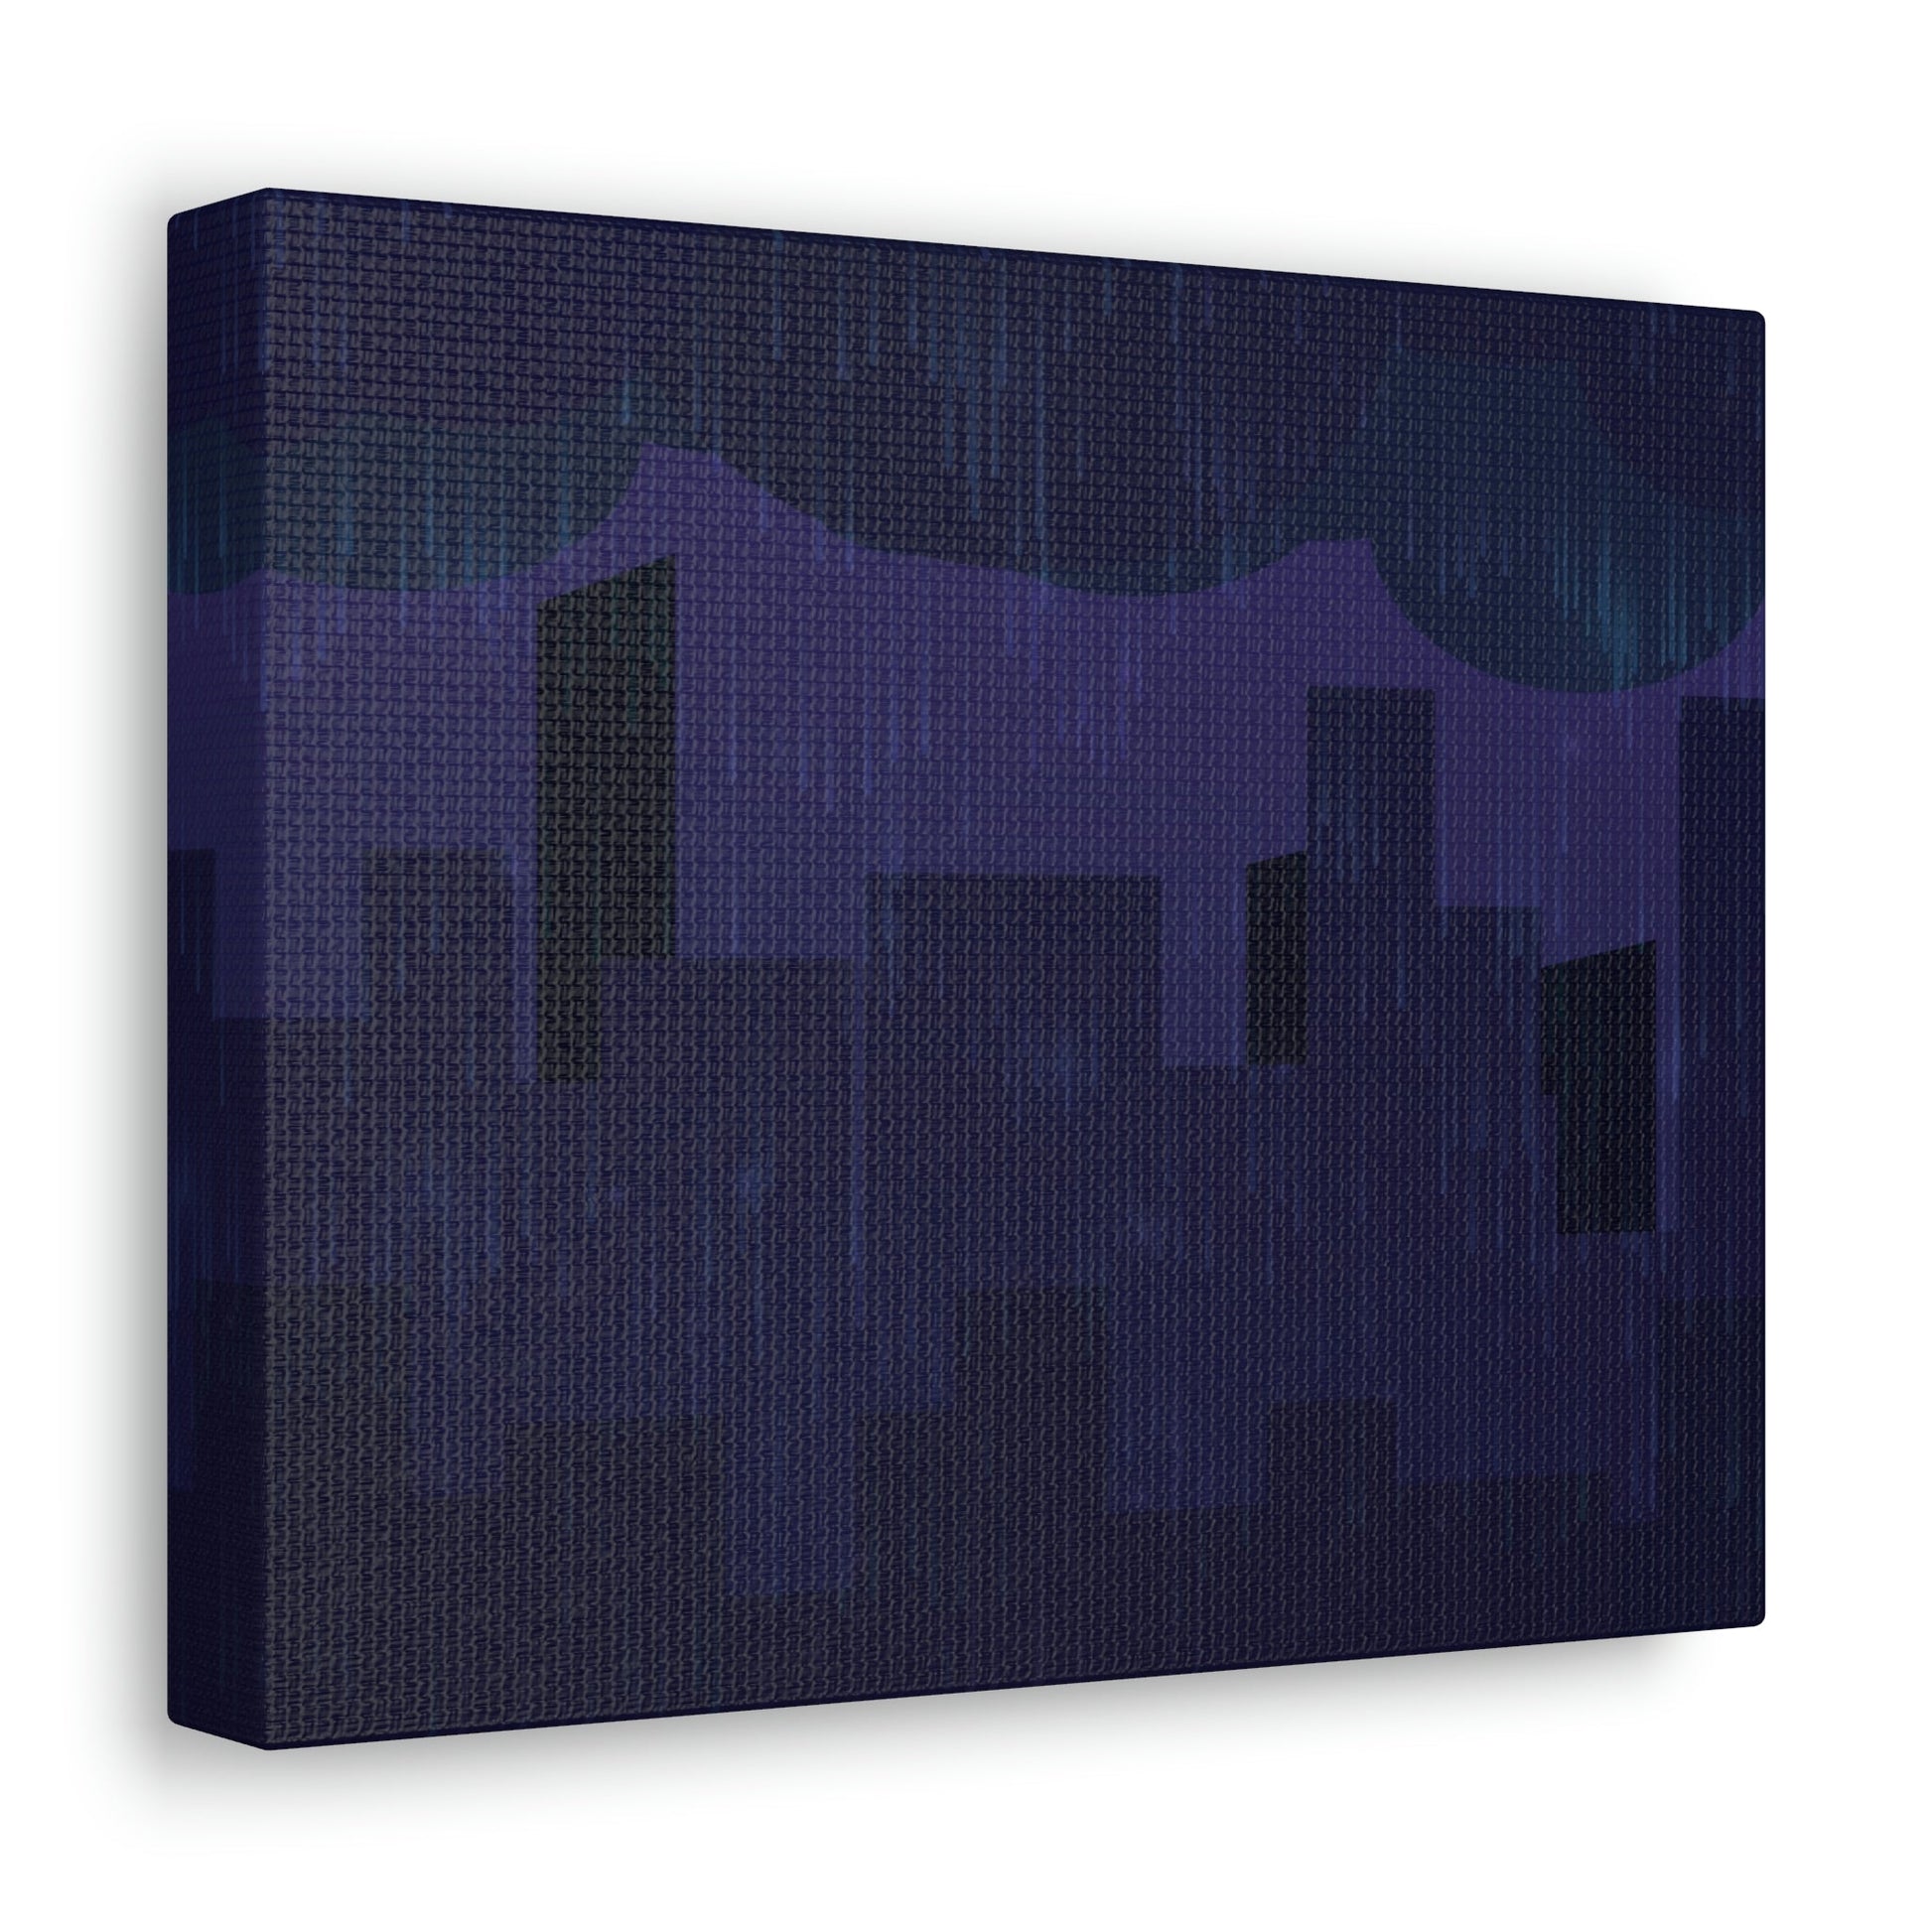 Midnight Rain In The City Thunderstorm City Silhouette View Classic Art Canvas Gallery Wraps Ichaku [Perfect Gifts Selection]